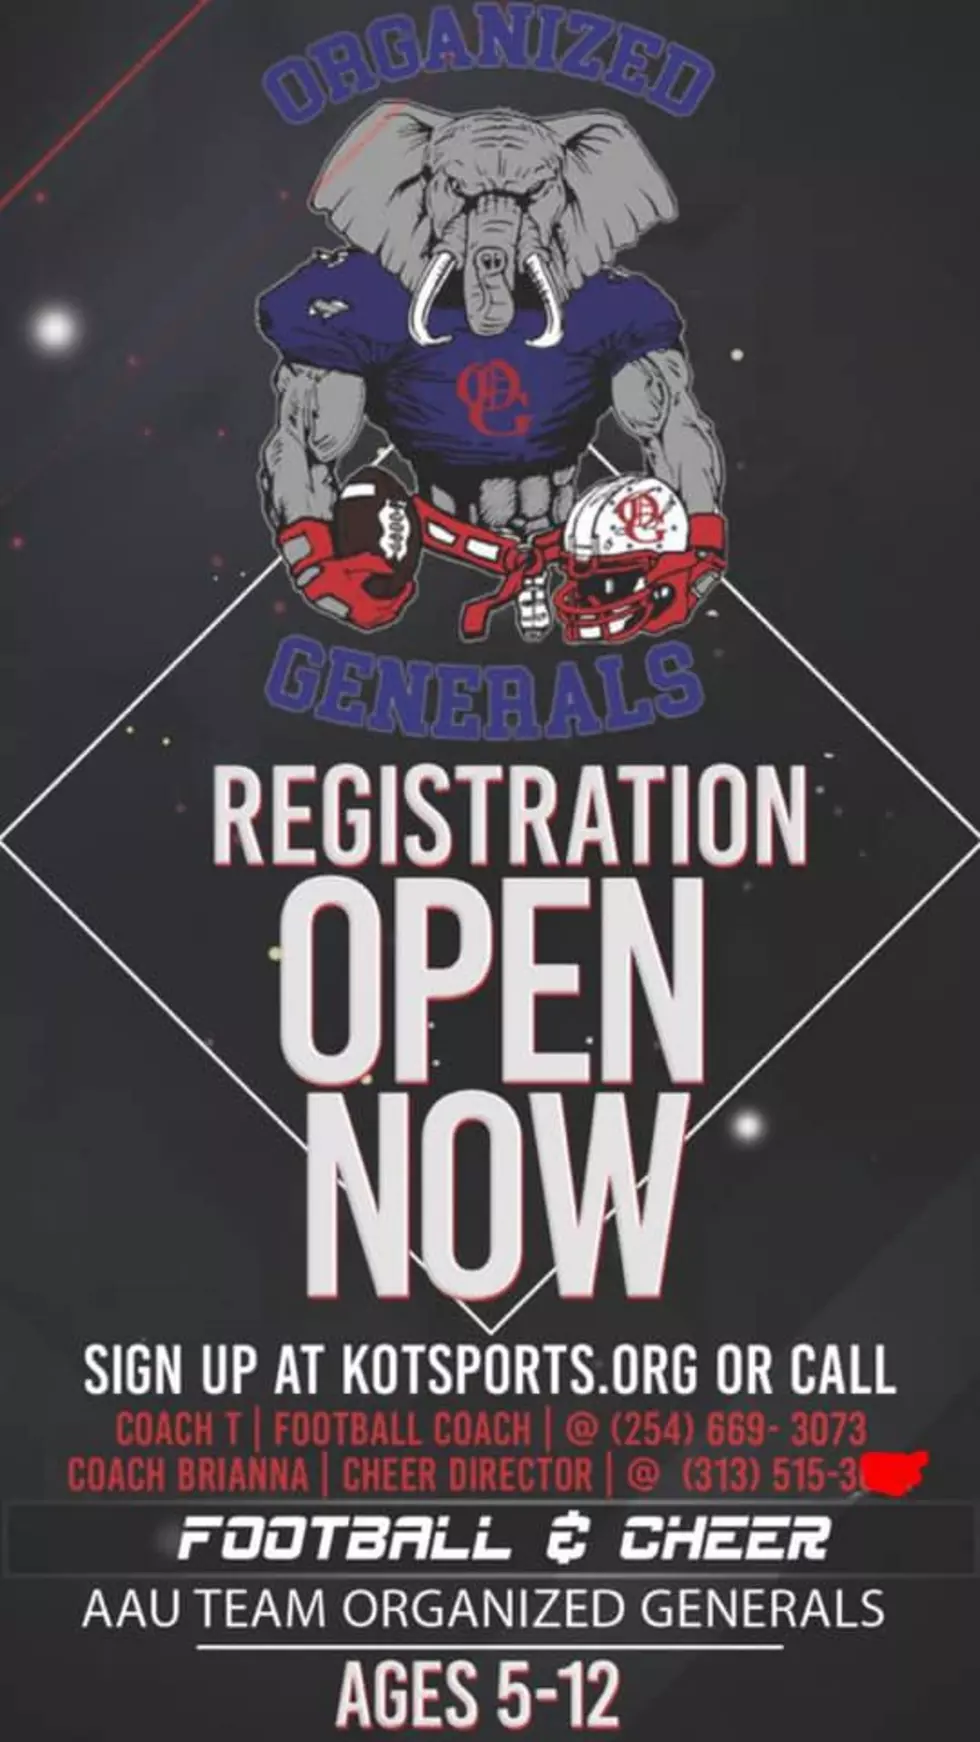 AAU Team Organized Generals Has Open Registration For CTX Football Players and Cheerleaders